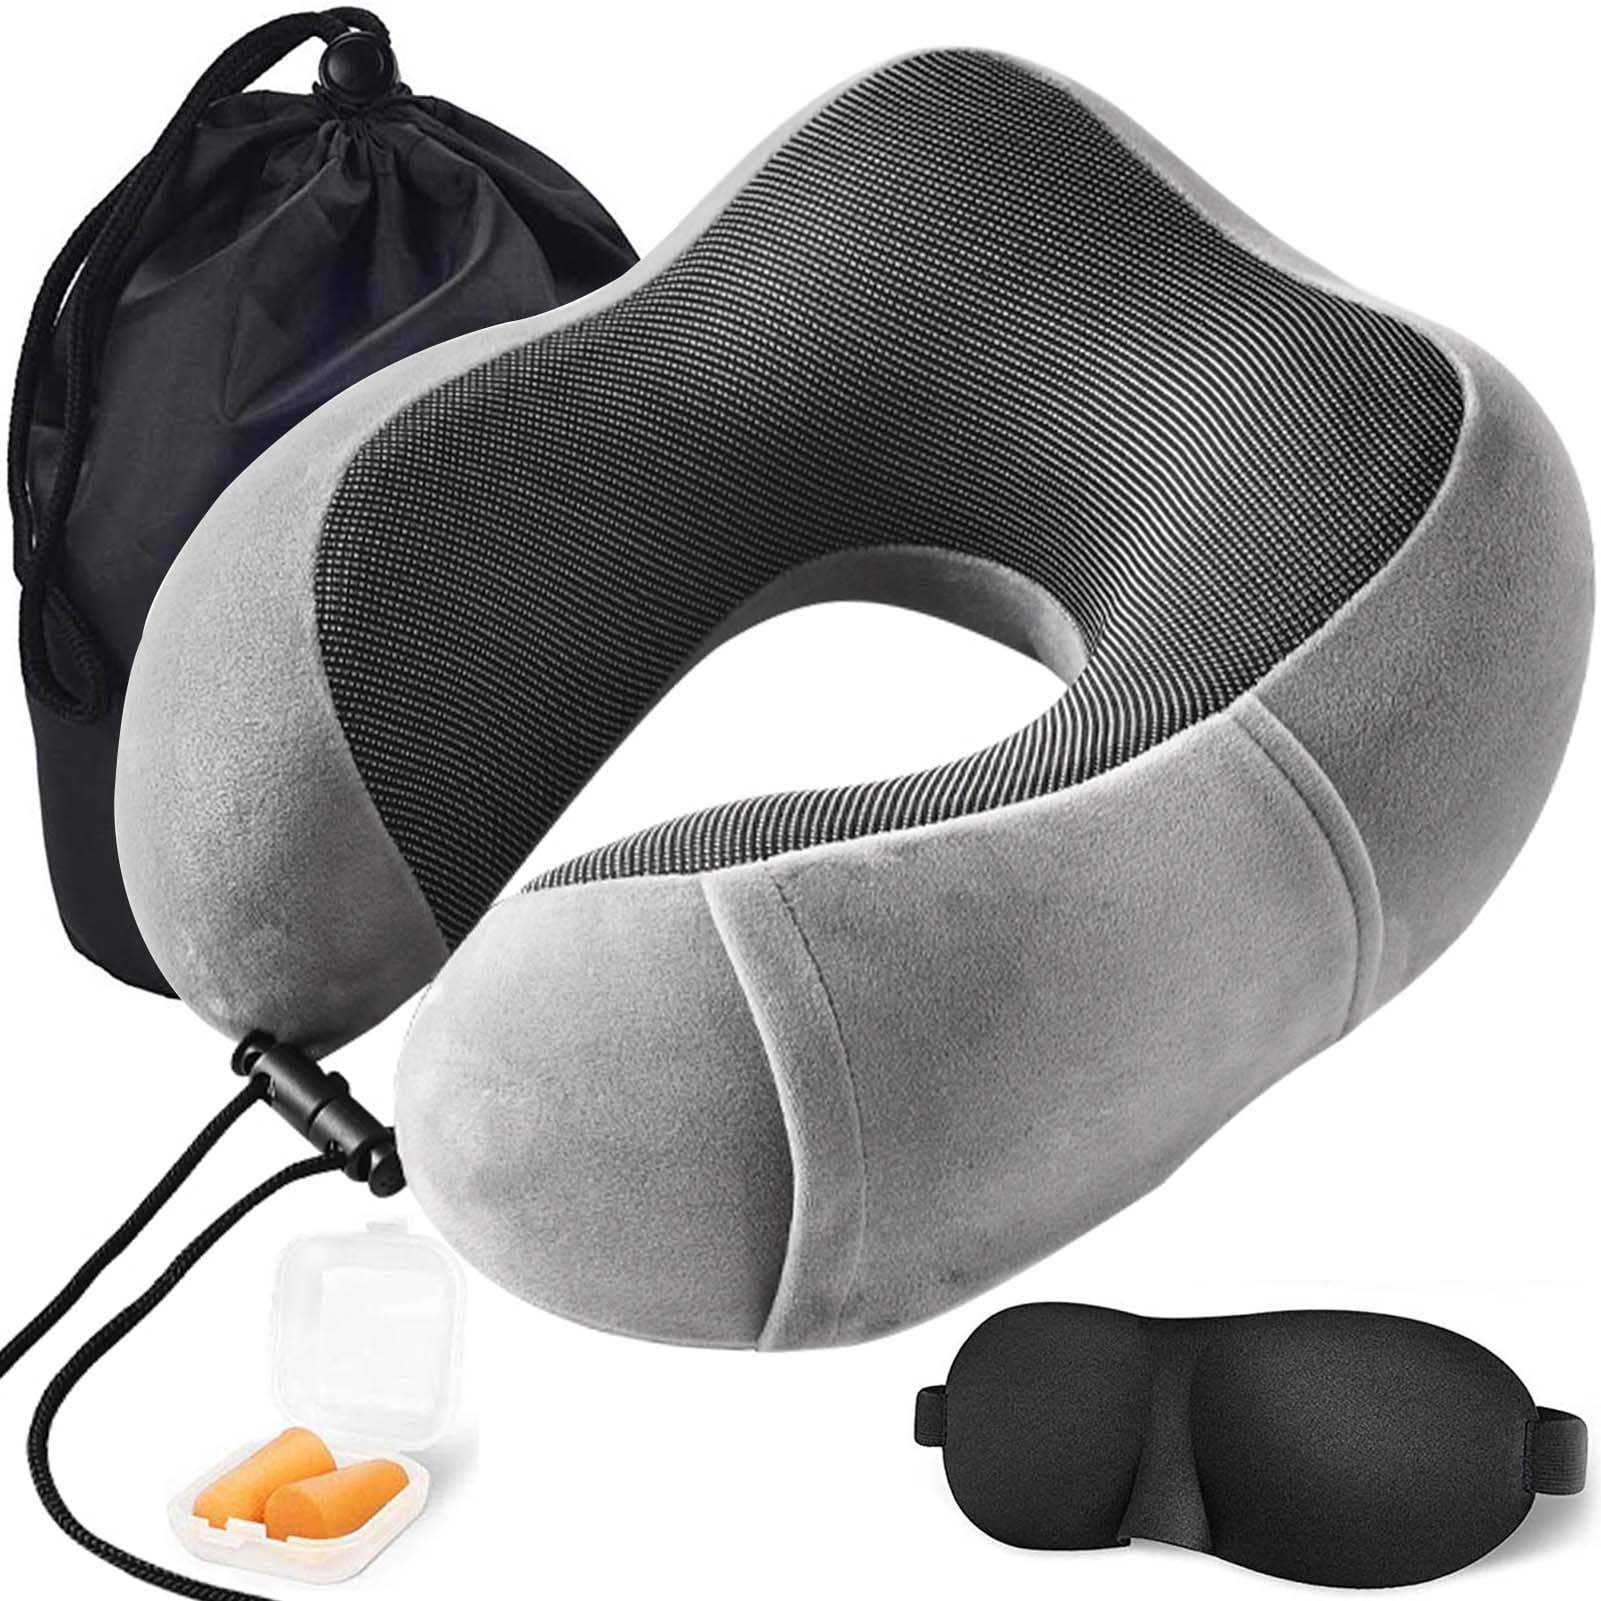 Driving Gray Head and Neck Support Aircraft Travel Pillow Super Soft and Comfortable Portable U Pillow Travel Home Leisure Suitable for Travel Machine Washable Office